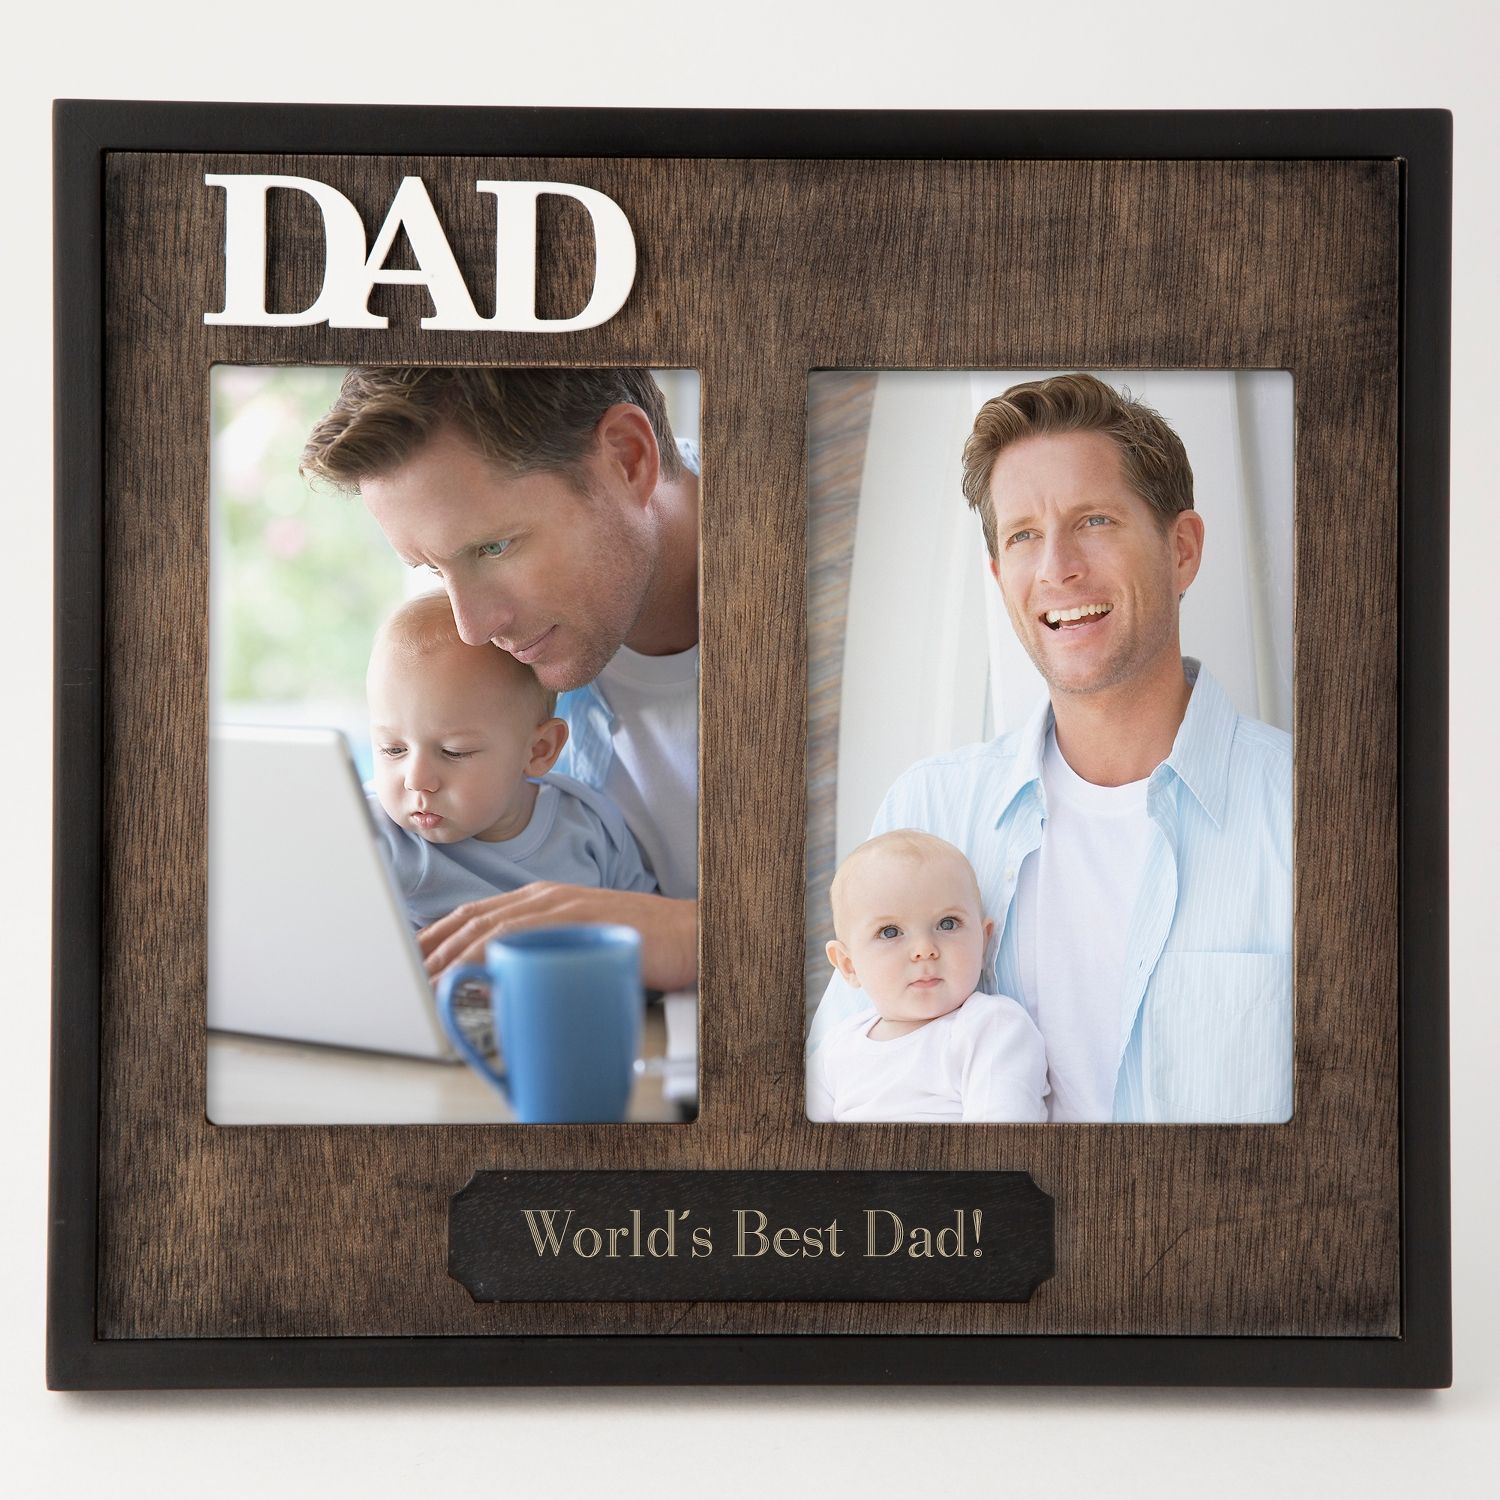 Dad Double Opening 4x6 Frame